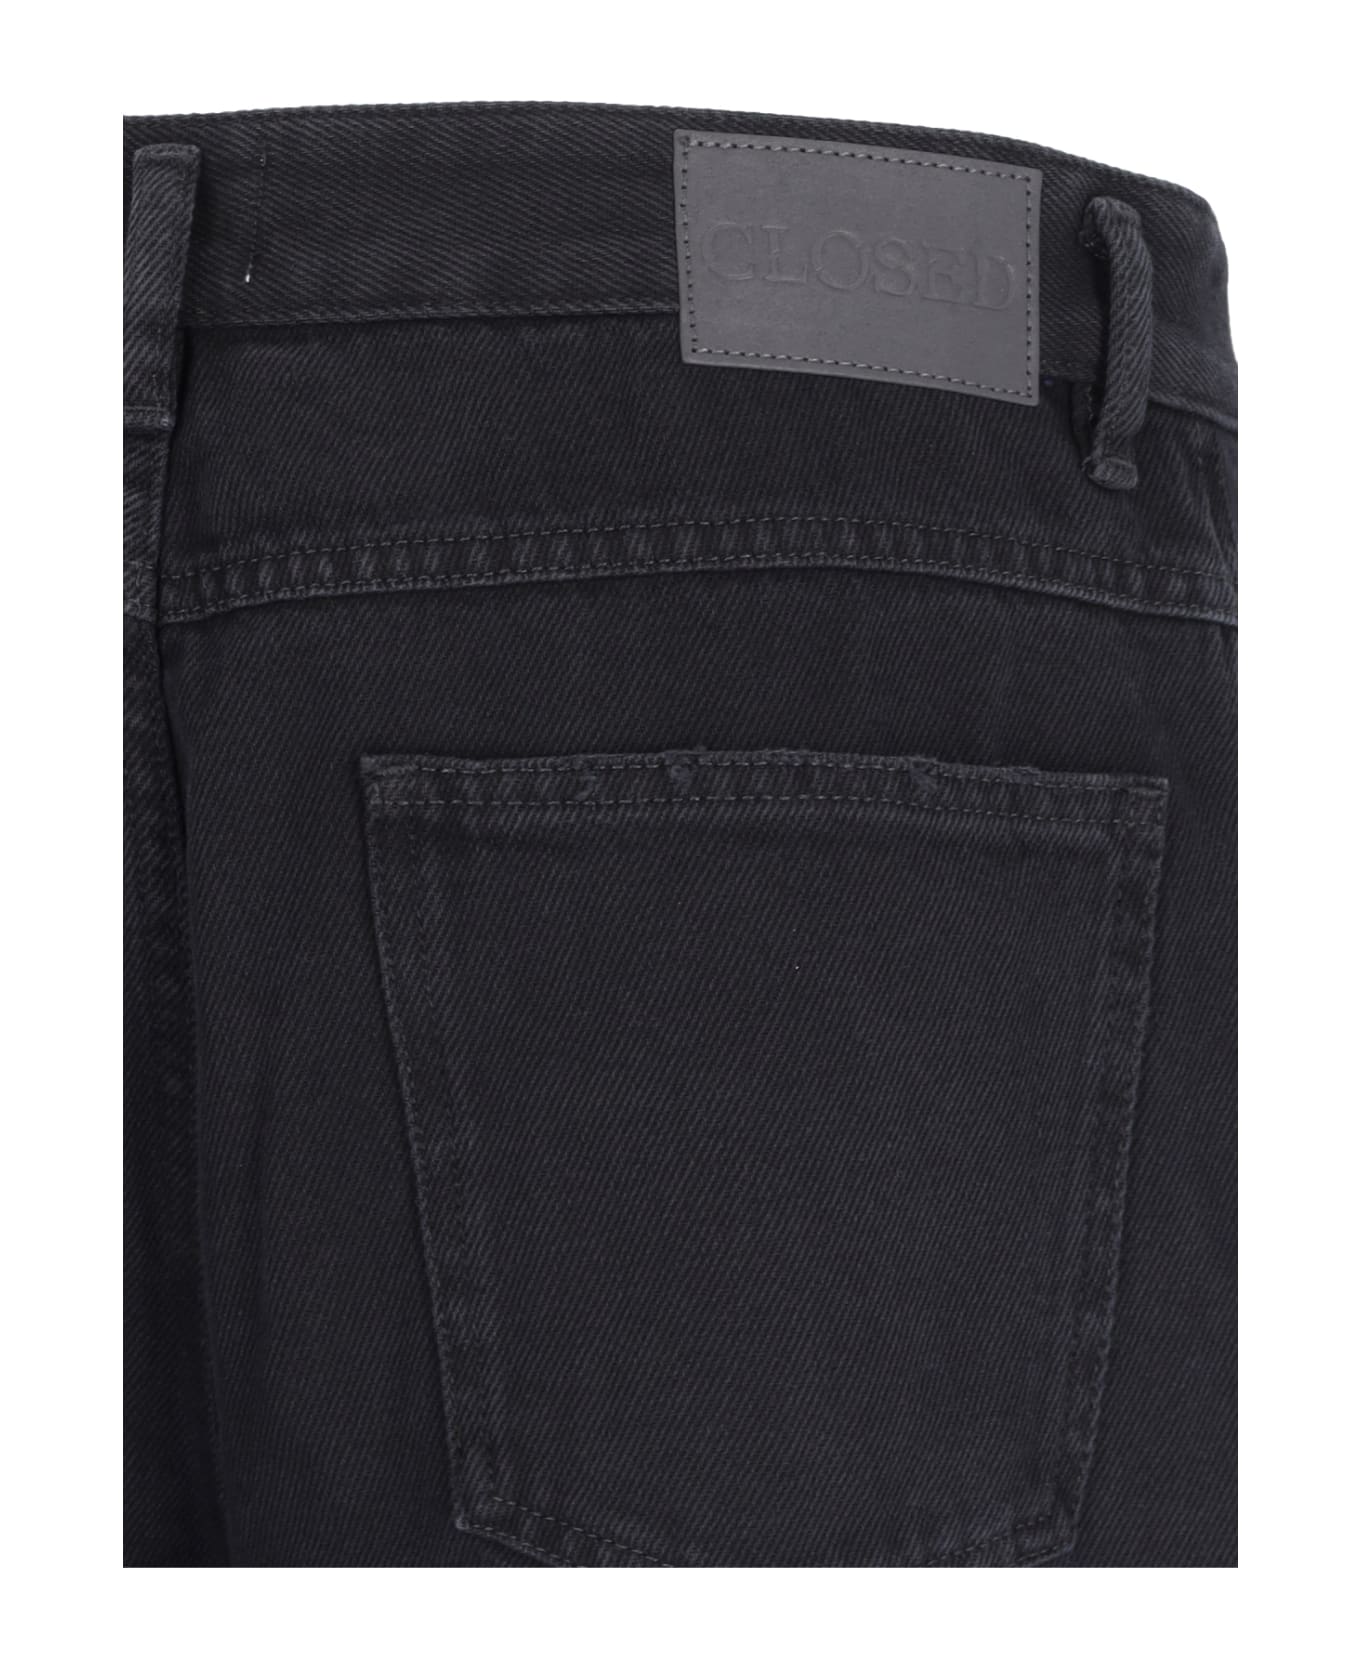 Closed 'x-lent Tapered' Wide Jeans - Black  